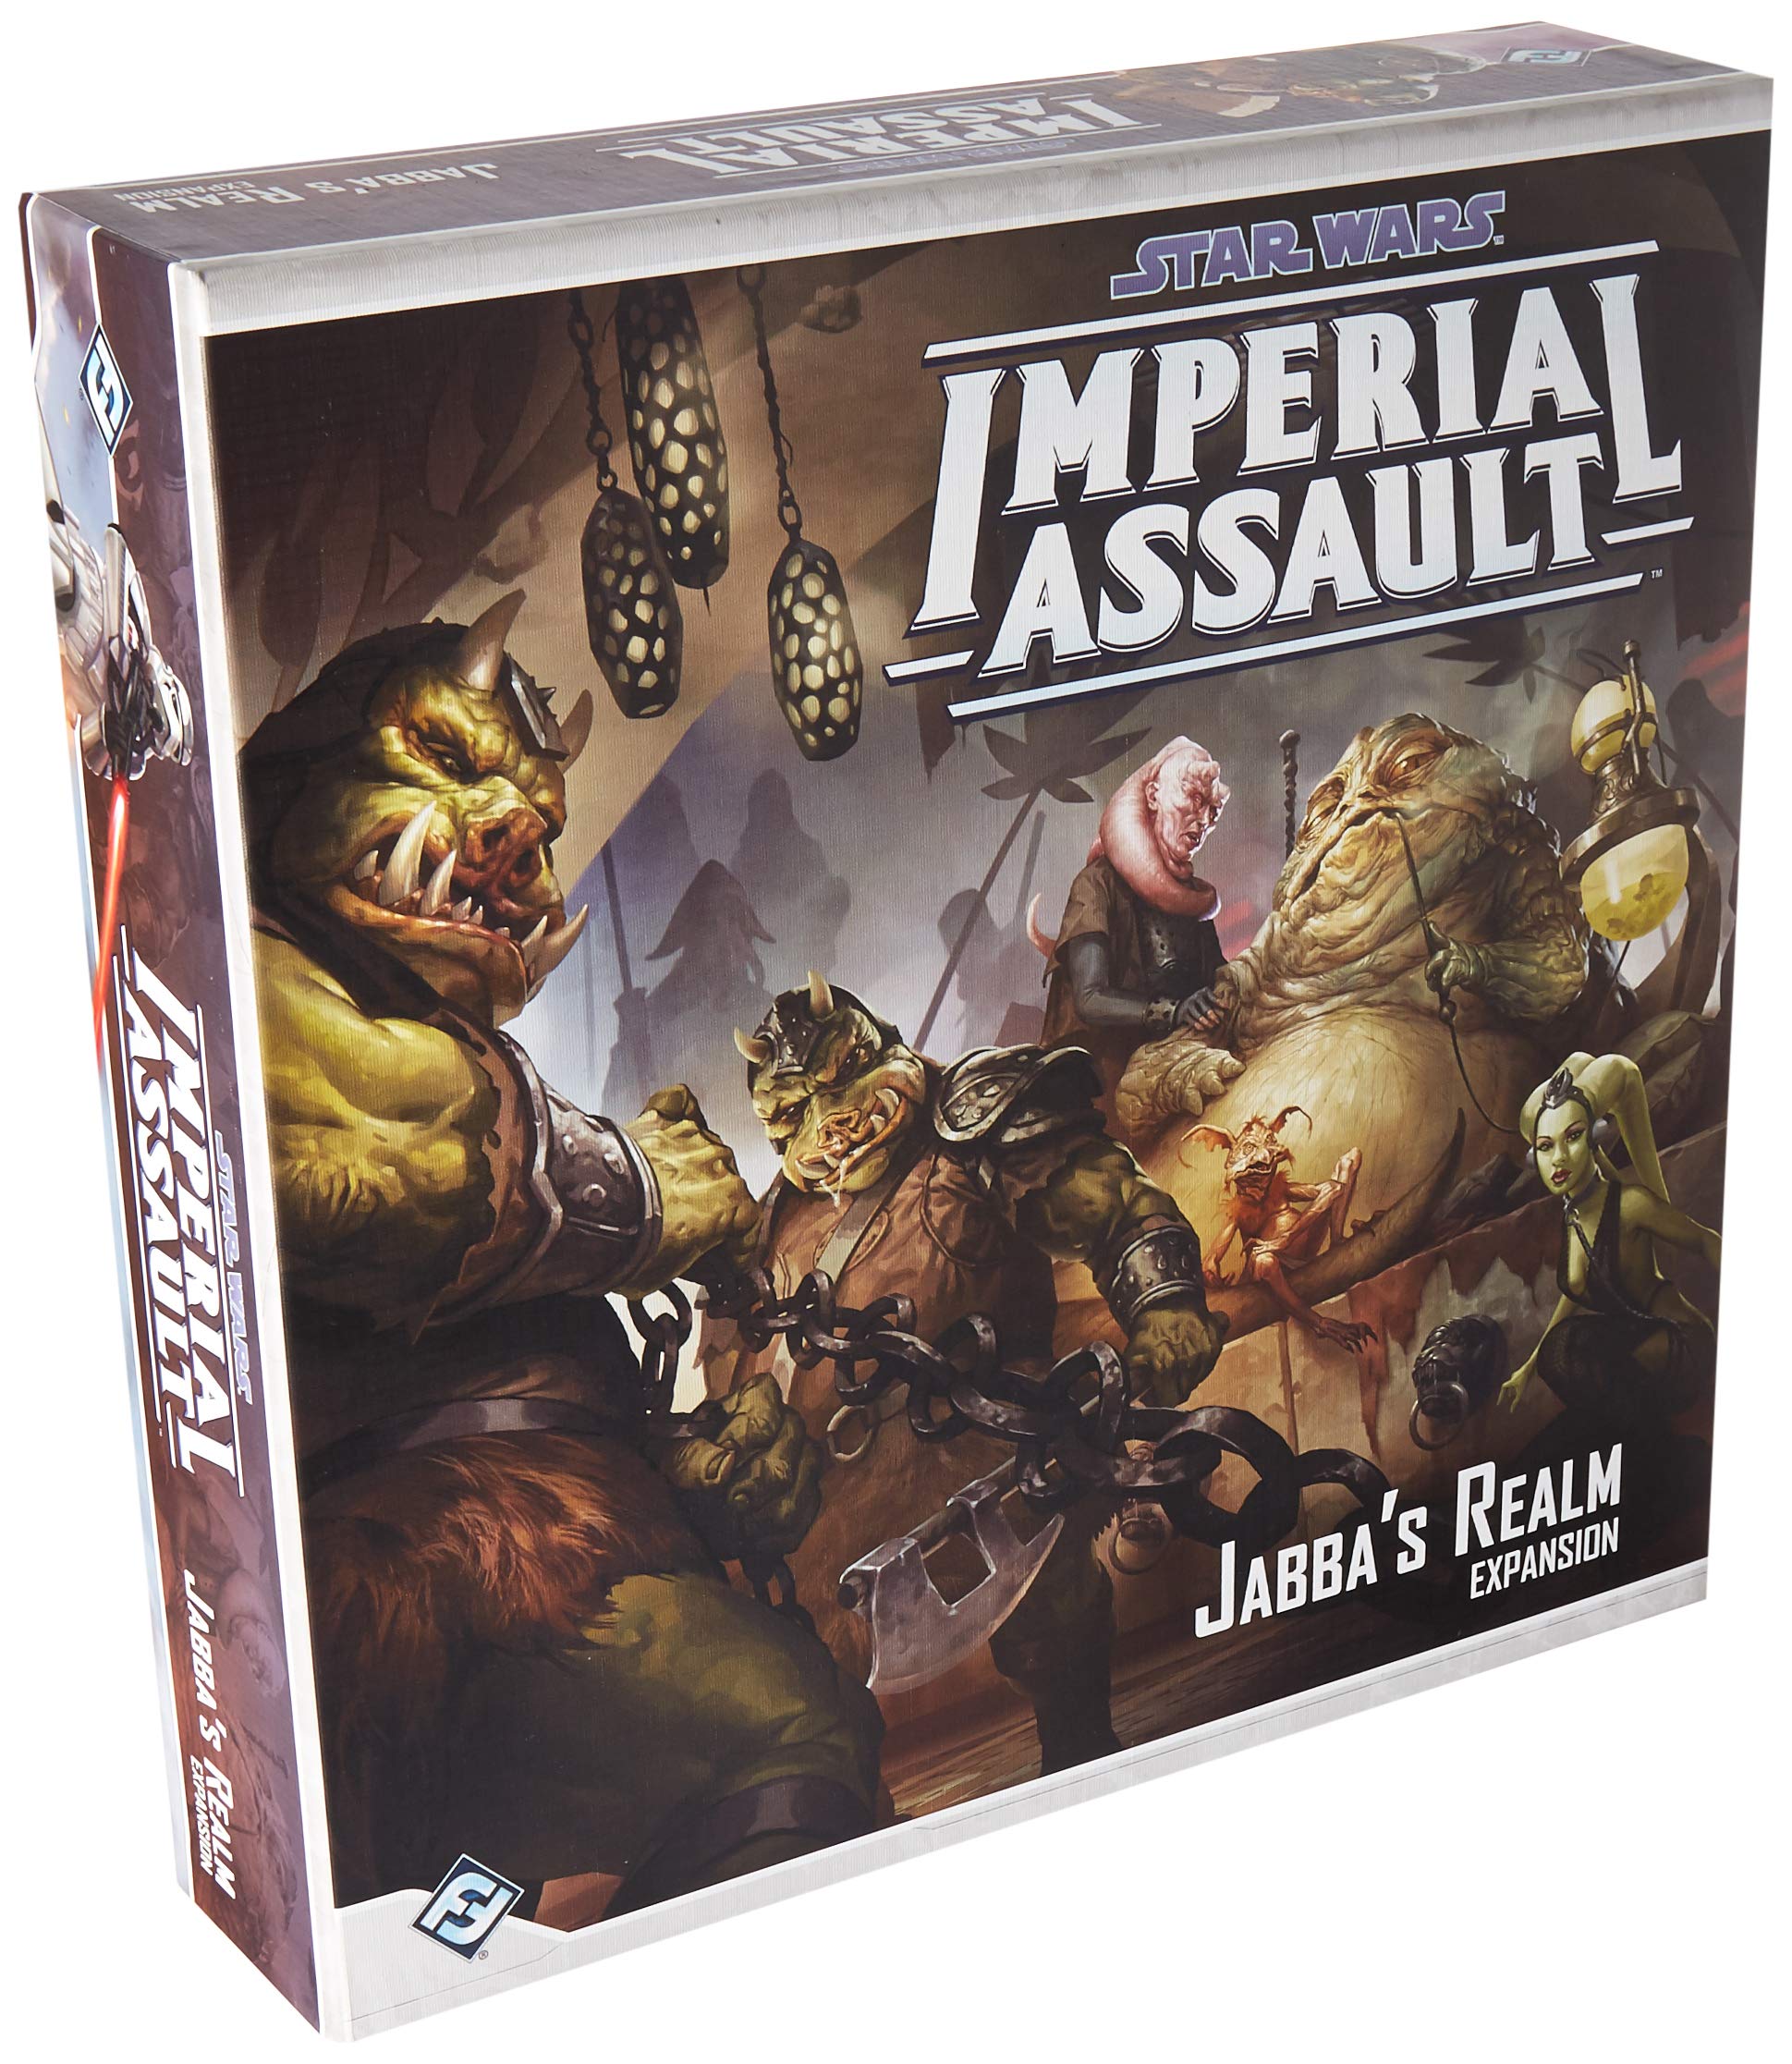 Star Wars: Imperial Assault - Jabba's Realm Expansion